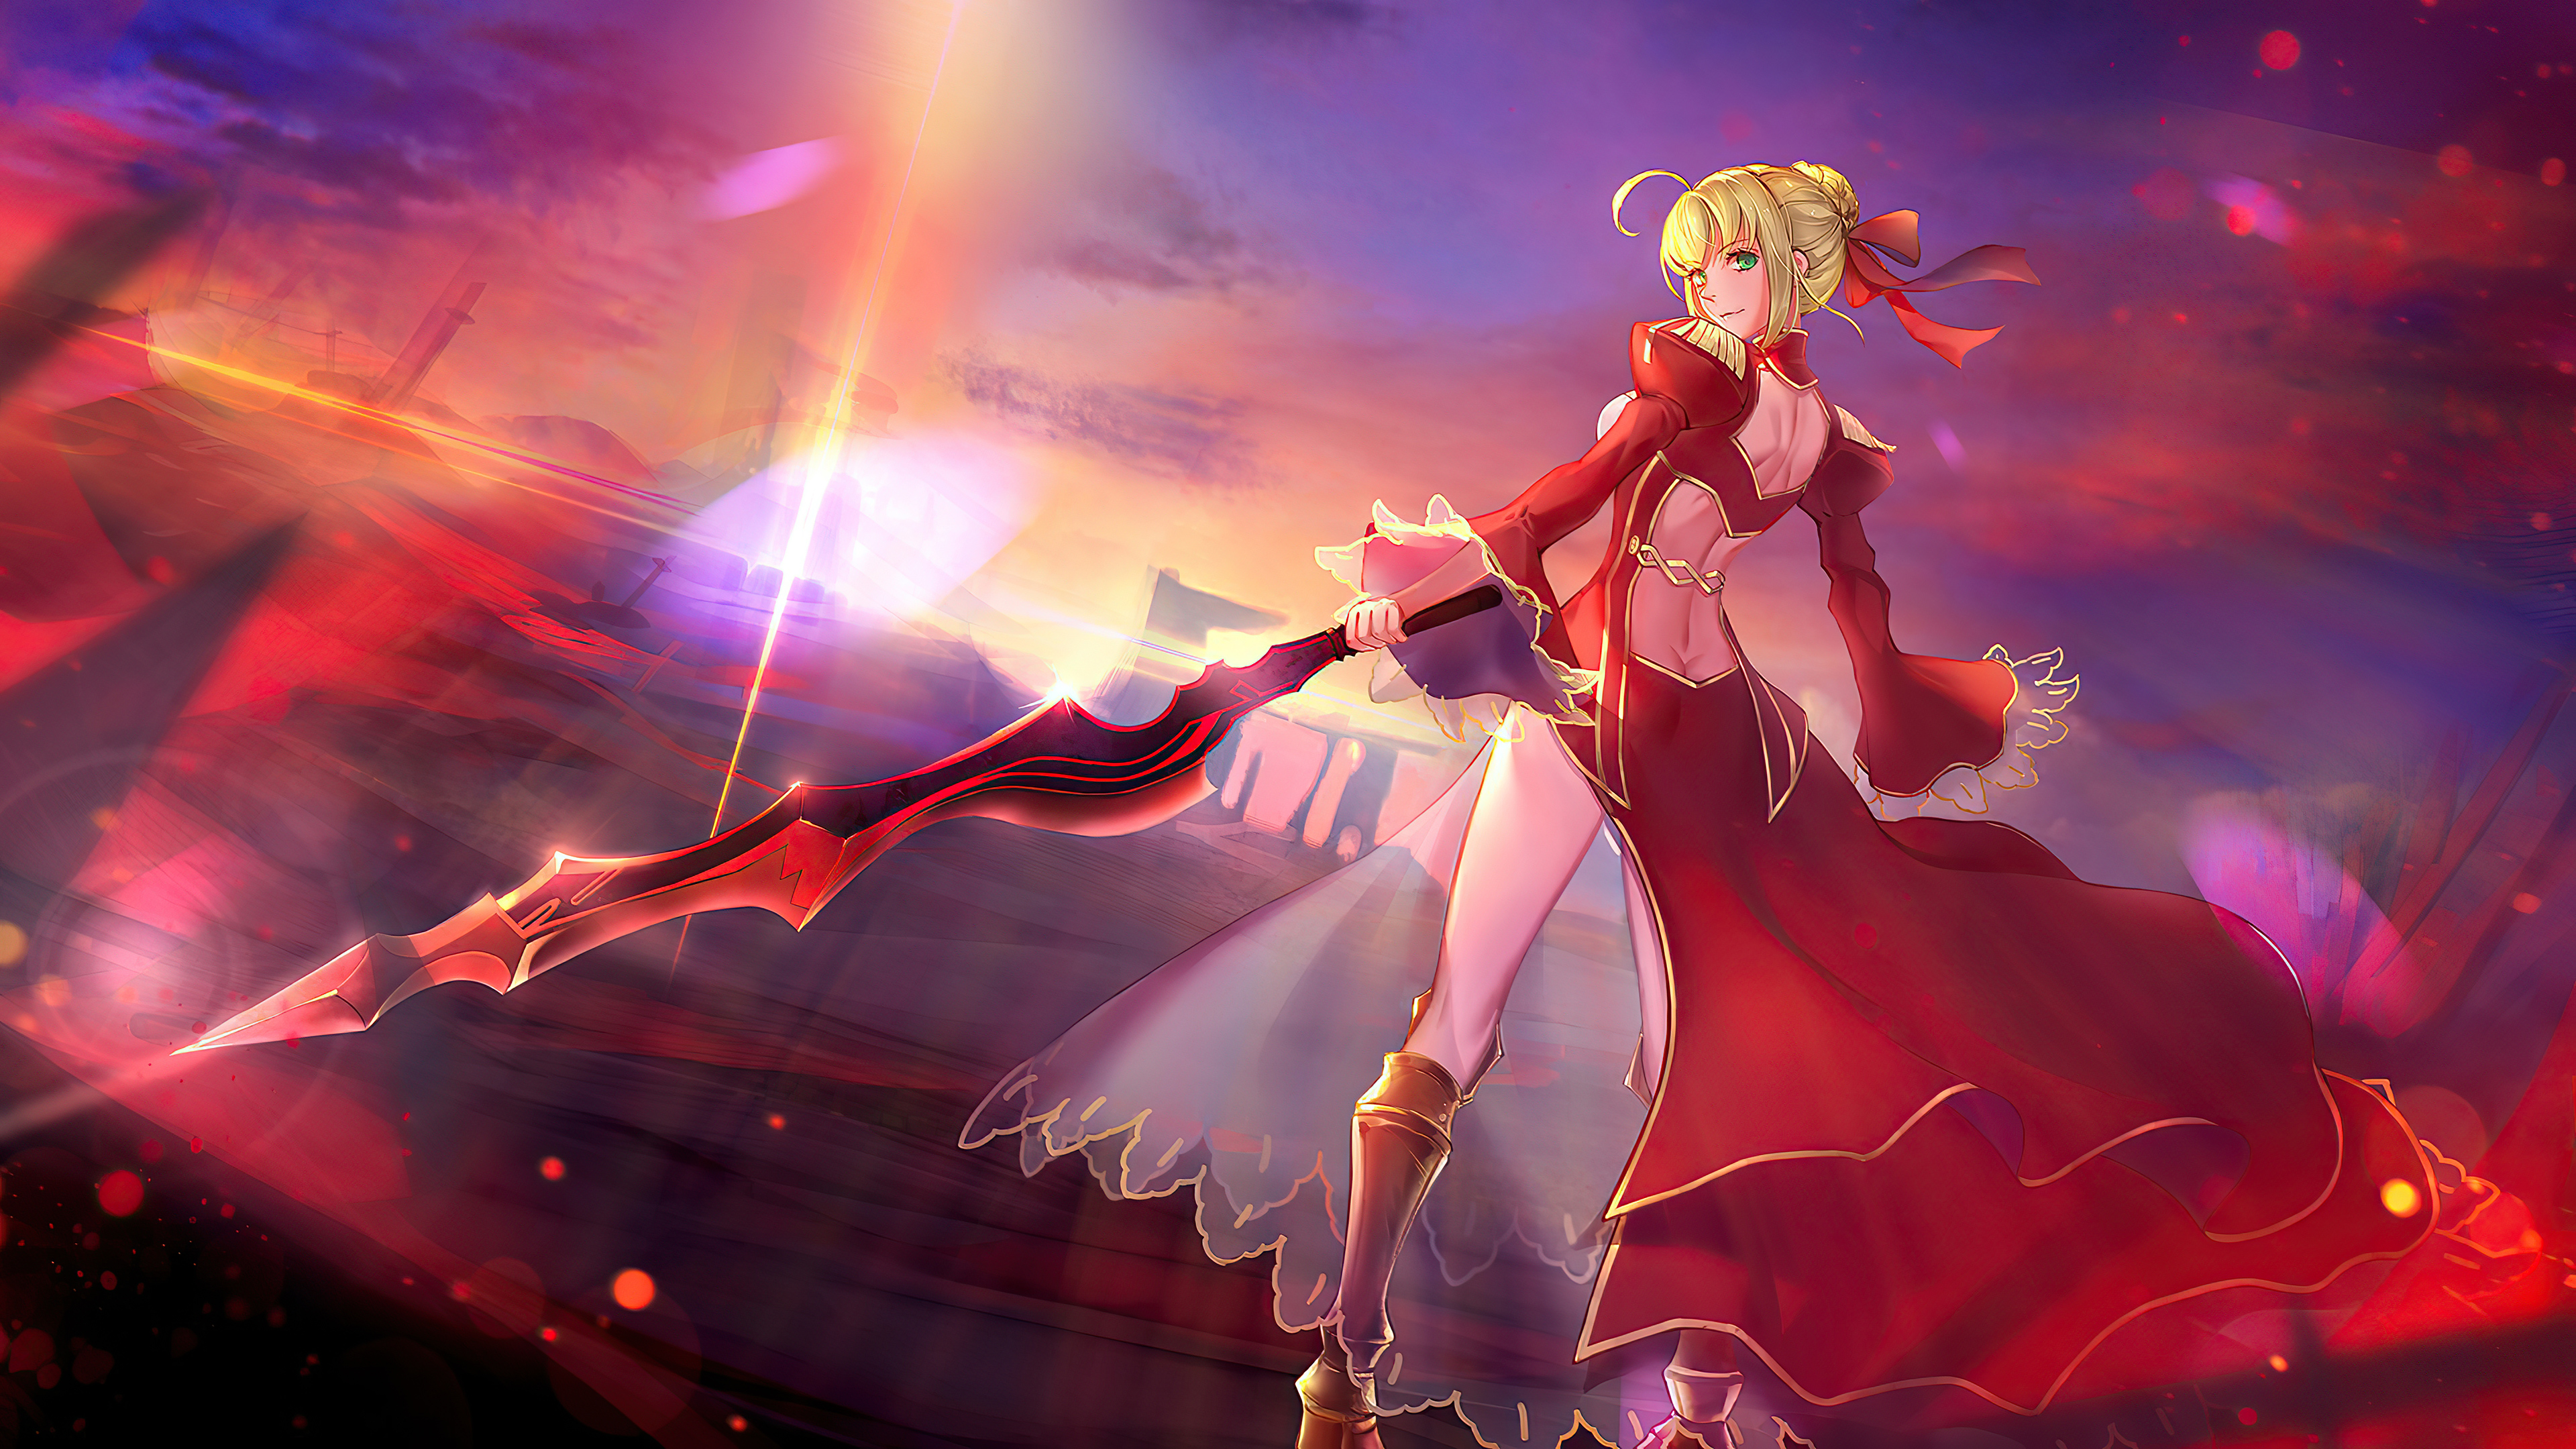 Fate Stay Night Anime 4k Hd Anime 4k Wallpapers Images Backgrounds Photos And Pictures